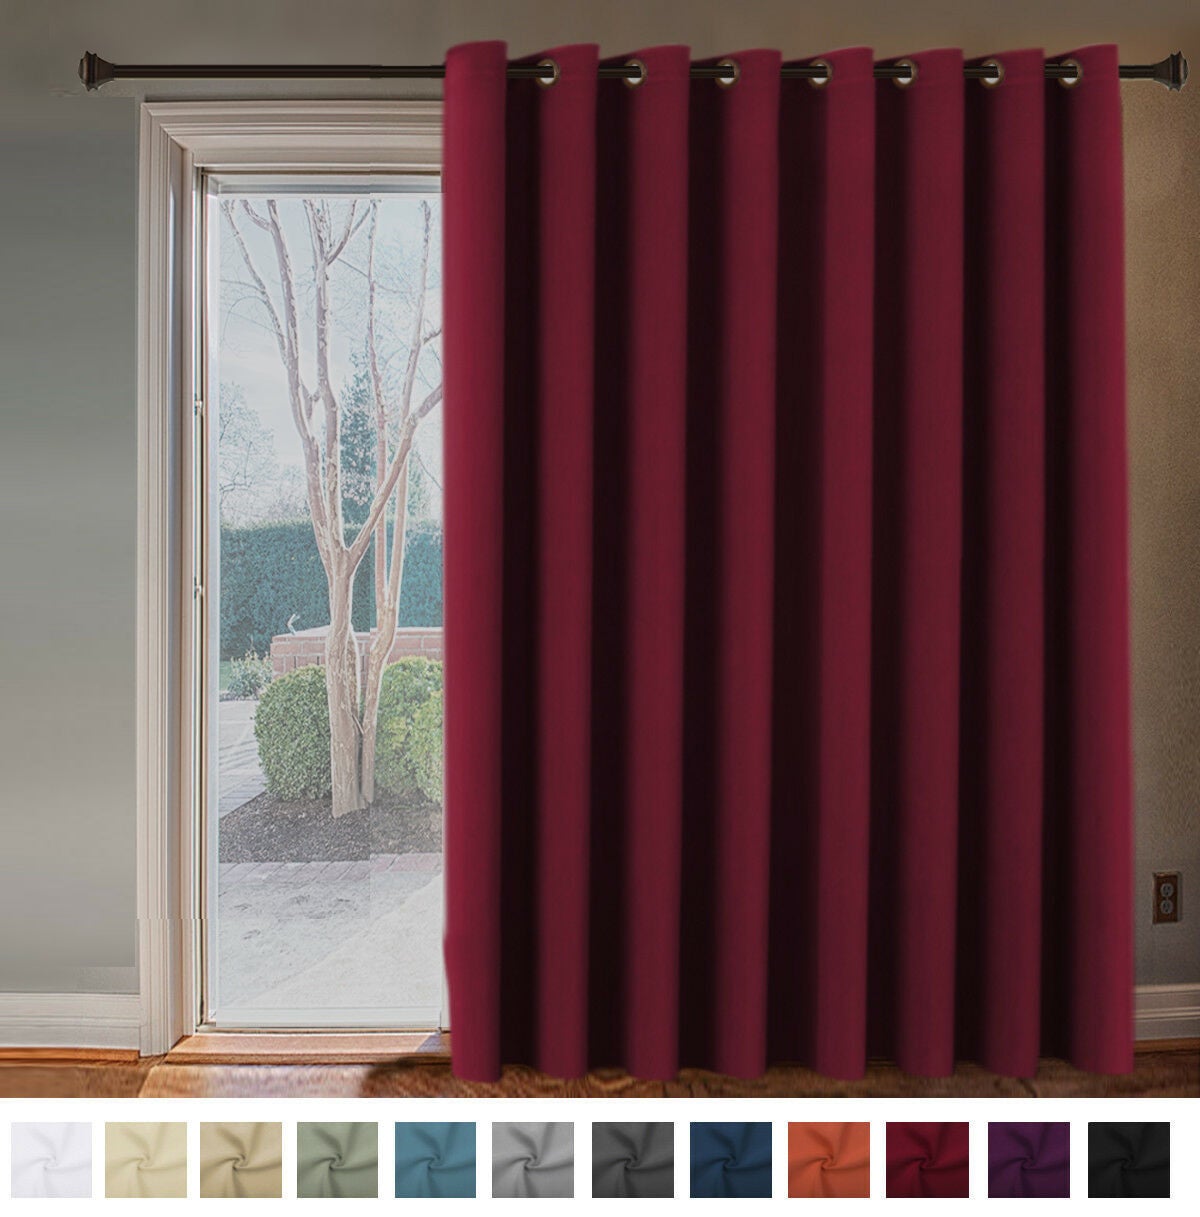 Double Wide Blockout Curtains Large Blackout Curtain Draperies Room Divider